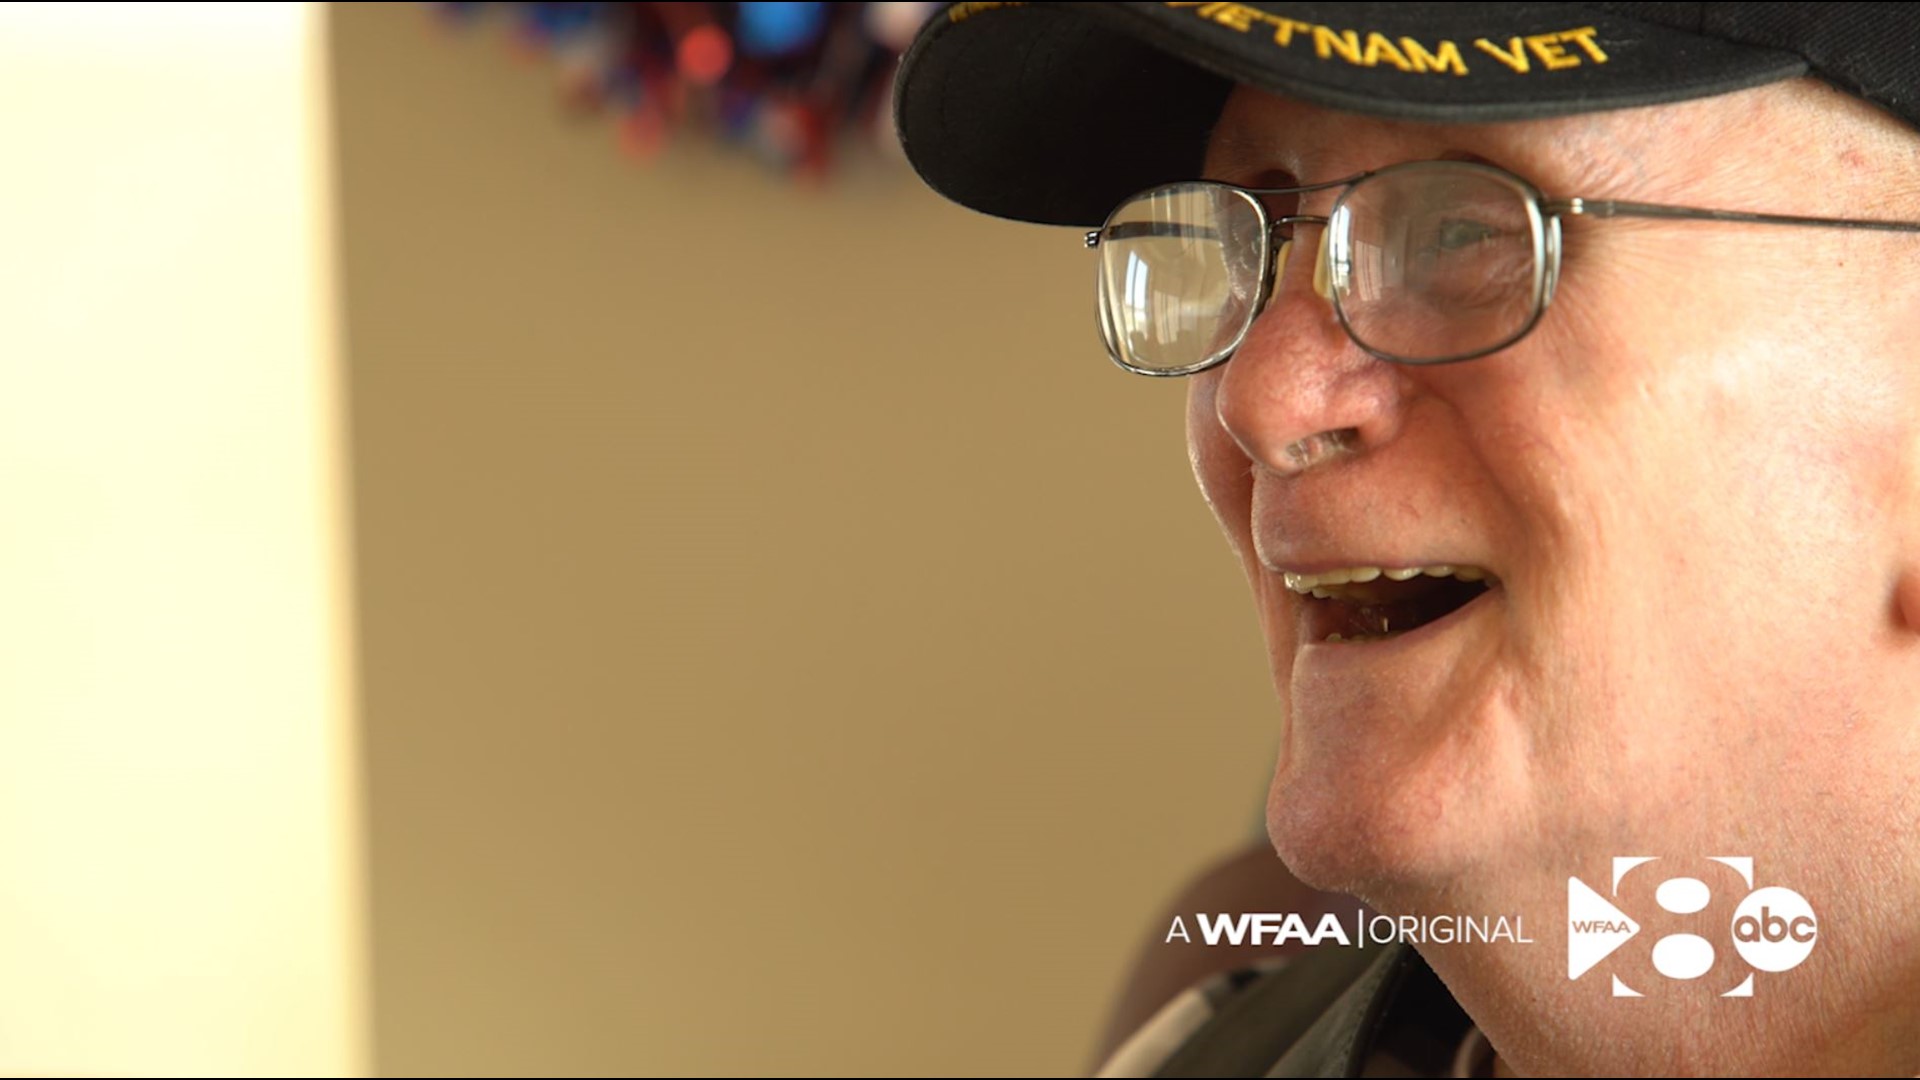 A man in Fort Worth found the Purple Hearts decades ago. This past weekend, the rightful owner was found and the medals were returned, in person.